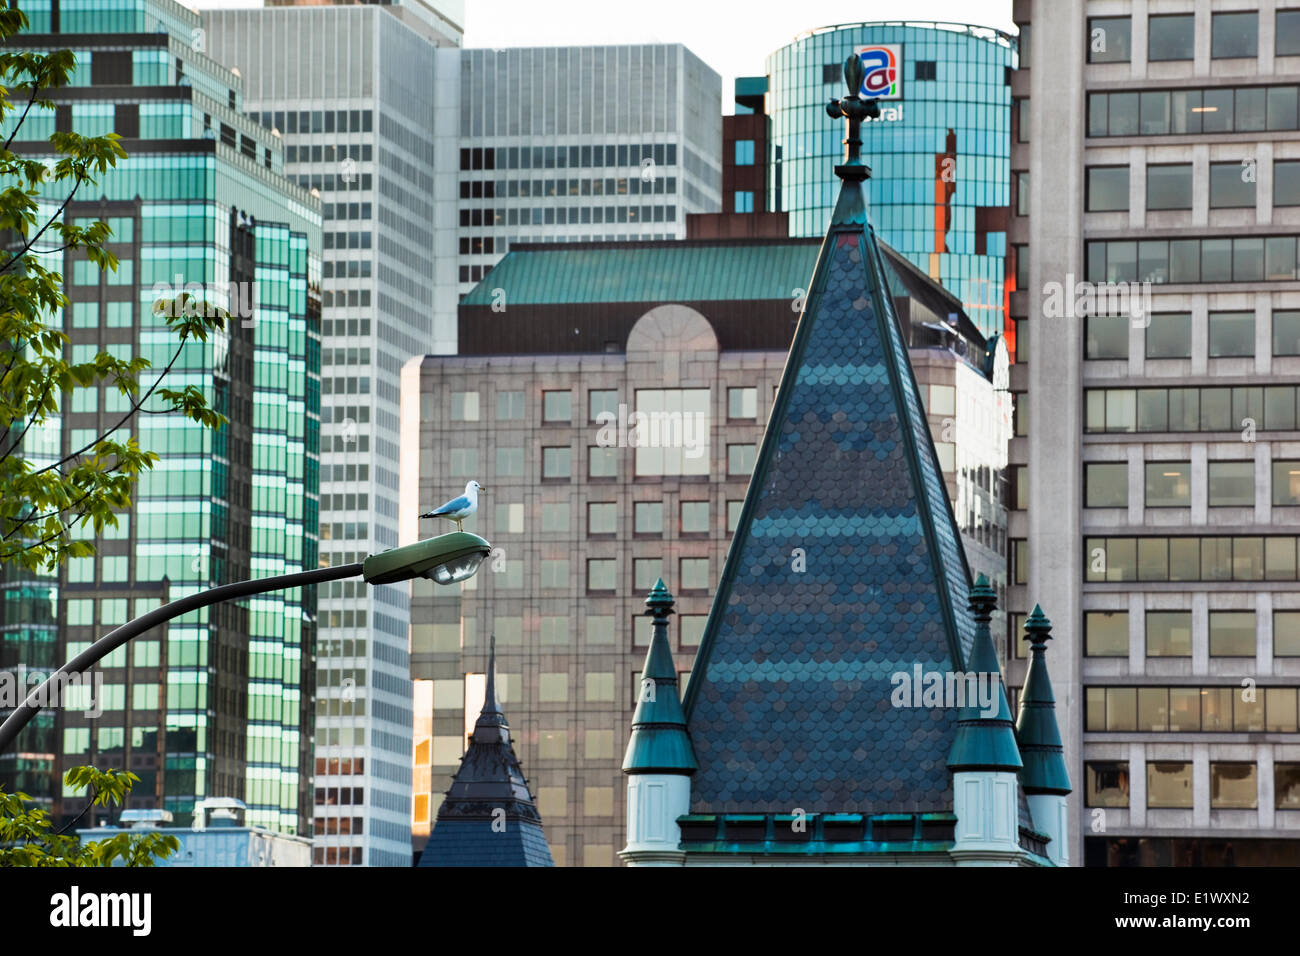 Compressed image of the various architectural styles of Montreal's downtown office buildings, Quebec, Canada Stock Photo